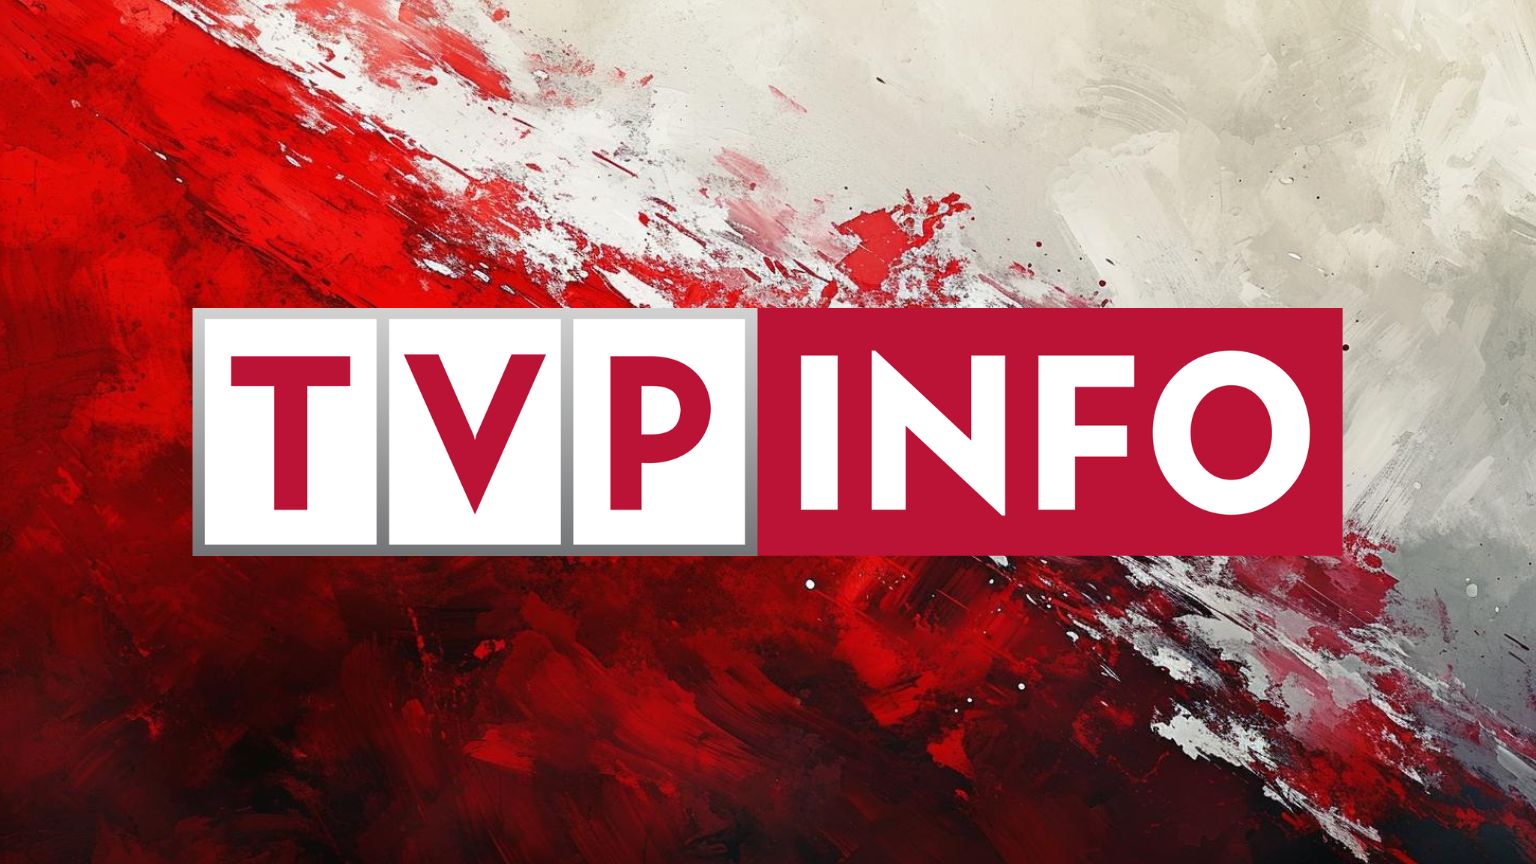 Polish Government Takes Over State Broadcaster TVP Info, Takes Several Channels off Air